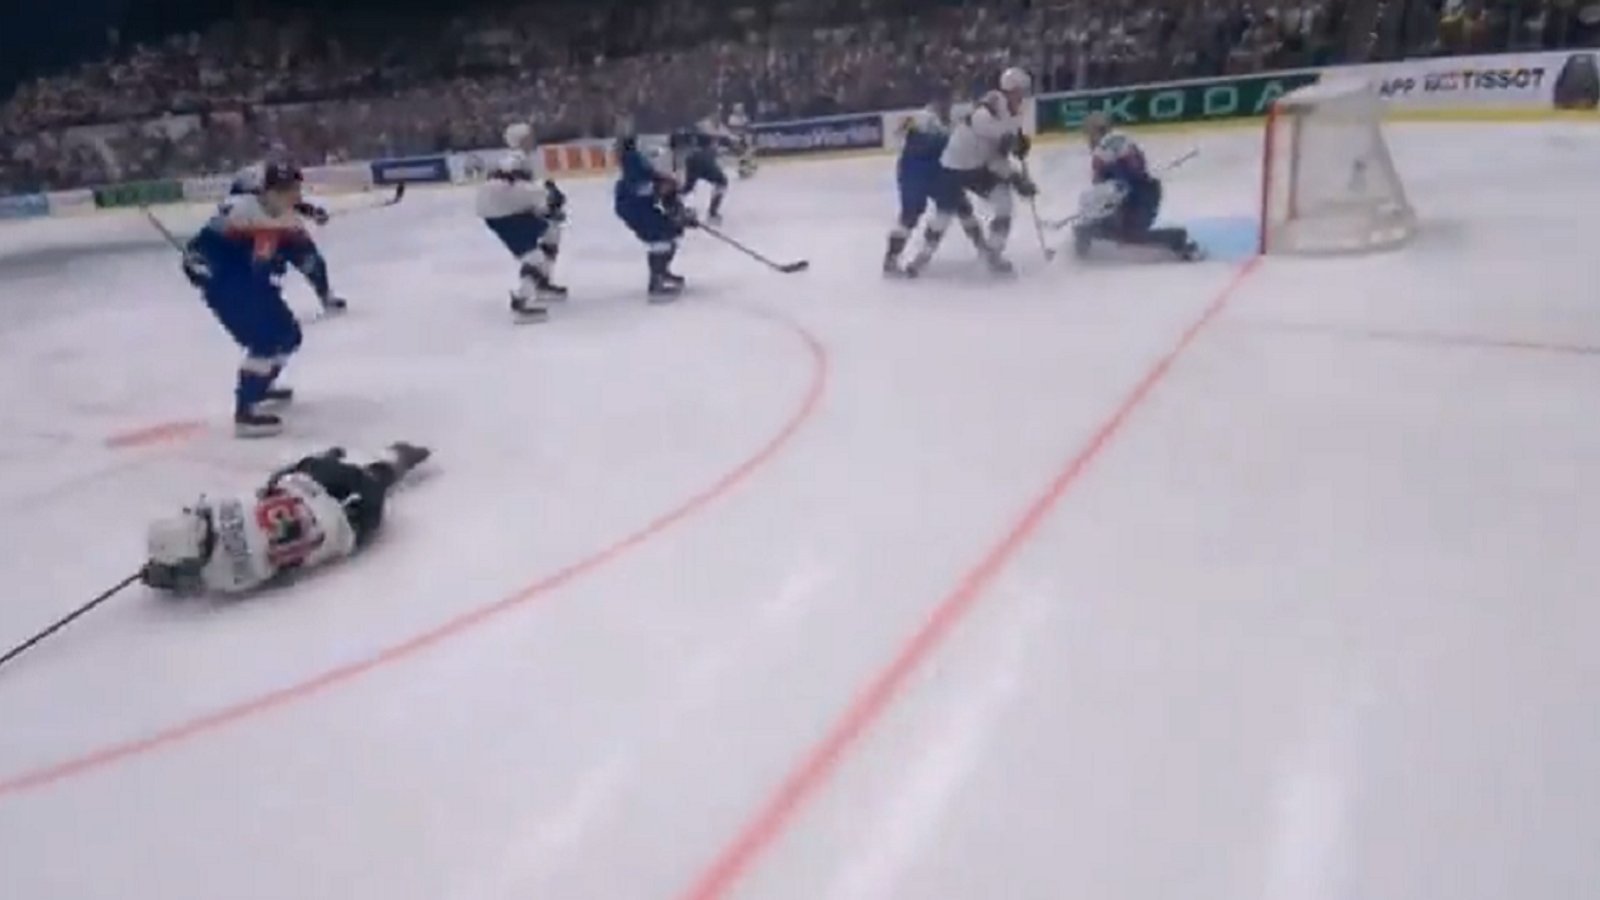 Johnny Gaudreau destroyed by huge hit at World Championship.